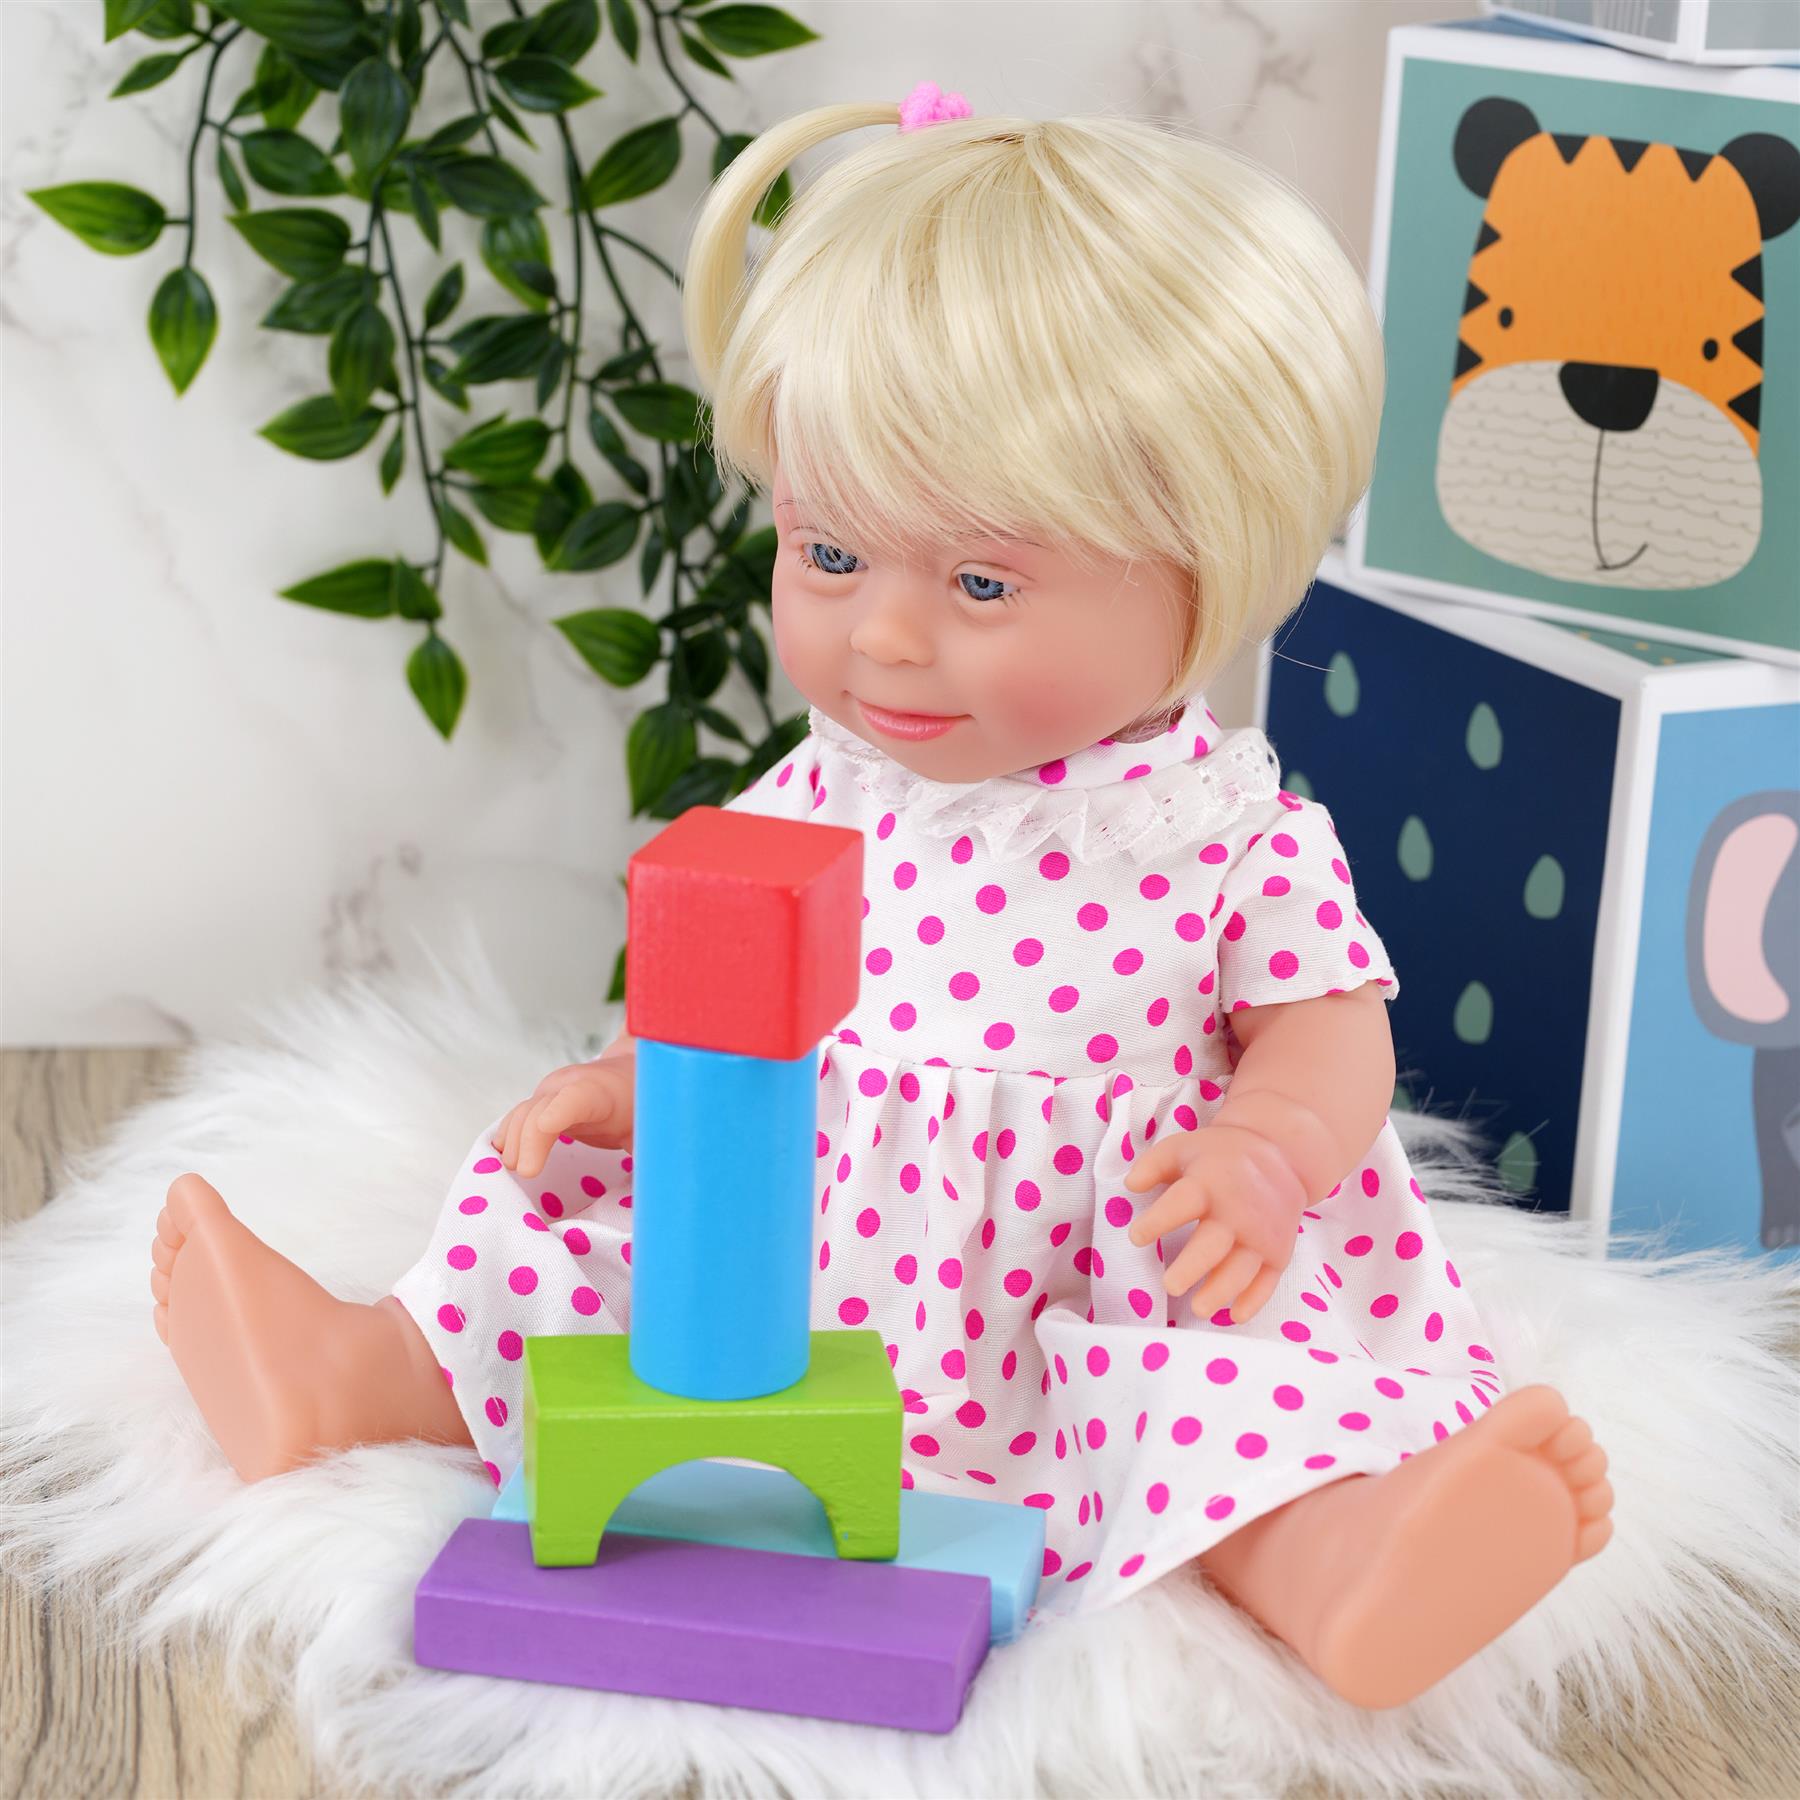 Blonde Baby Girl Dolls with Down Syndrome by BiBi Doll - UKBuyZone